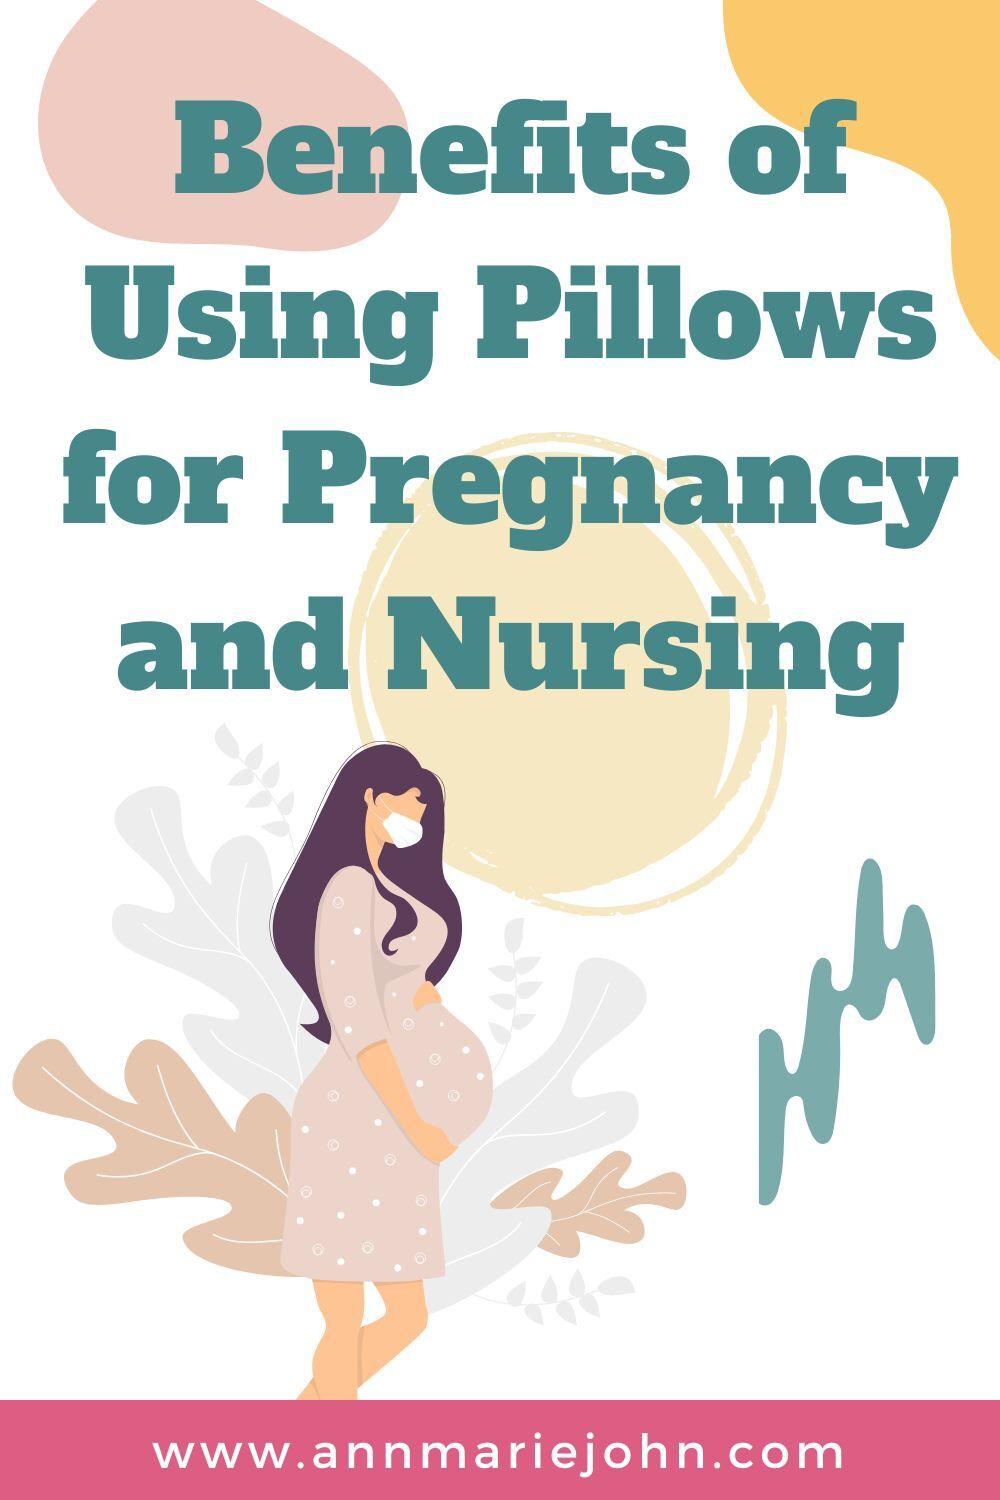 Benefits of Using Pillows for Pregnancy and Nursing